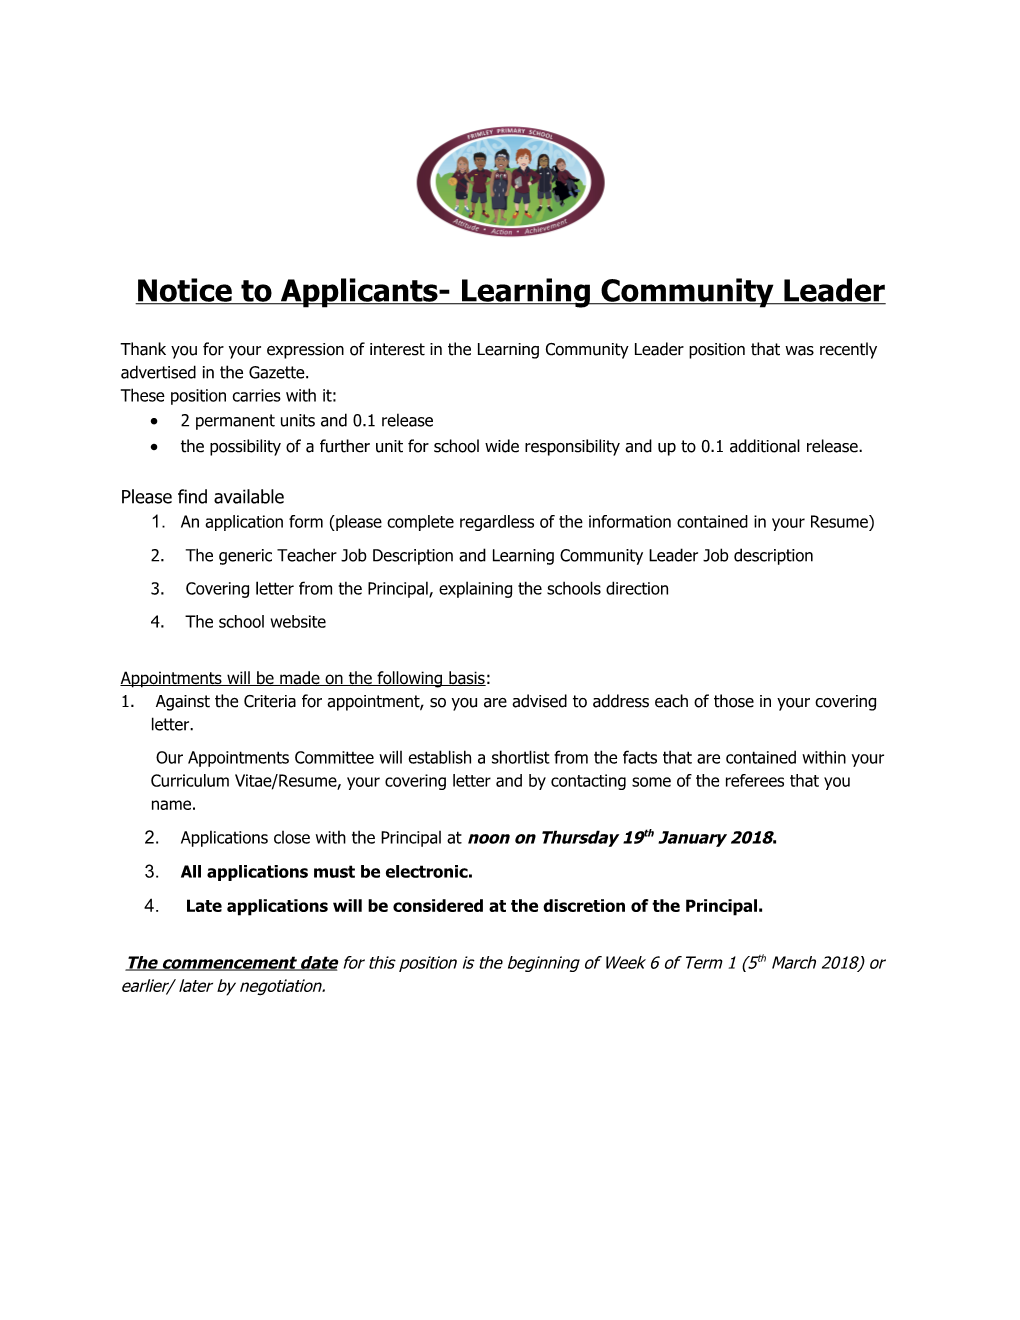 Notice to Applicants- Learning Community Leader